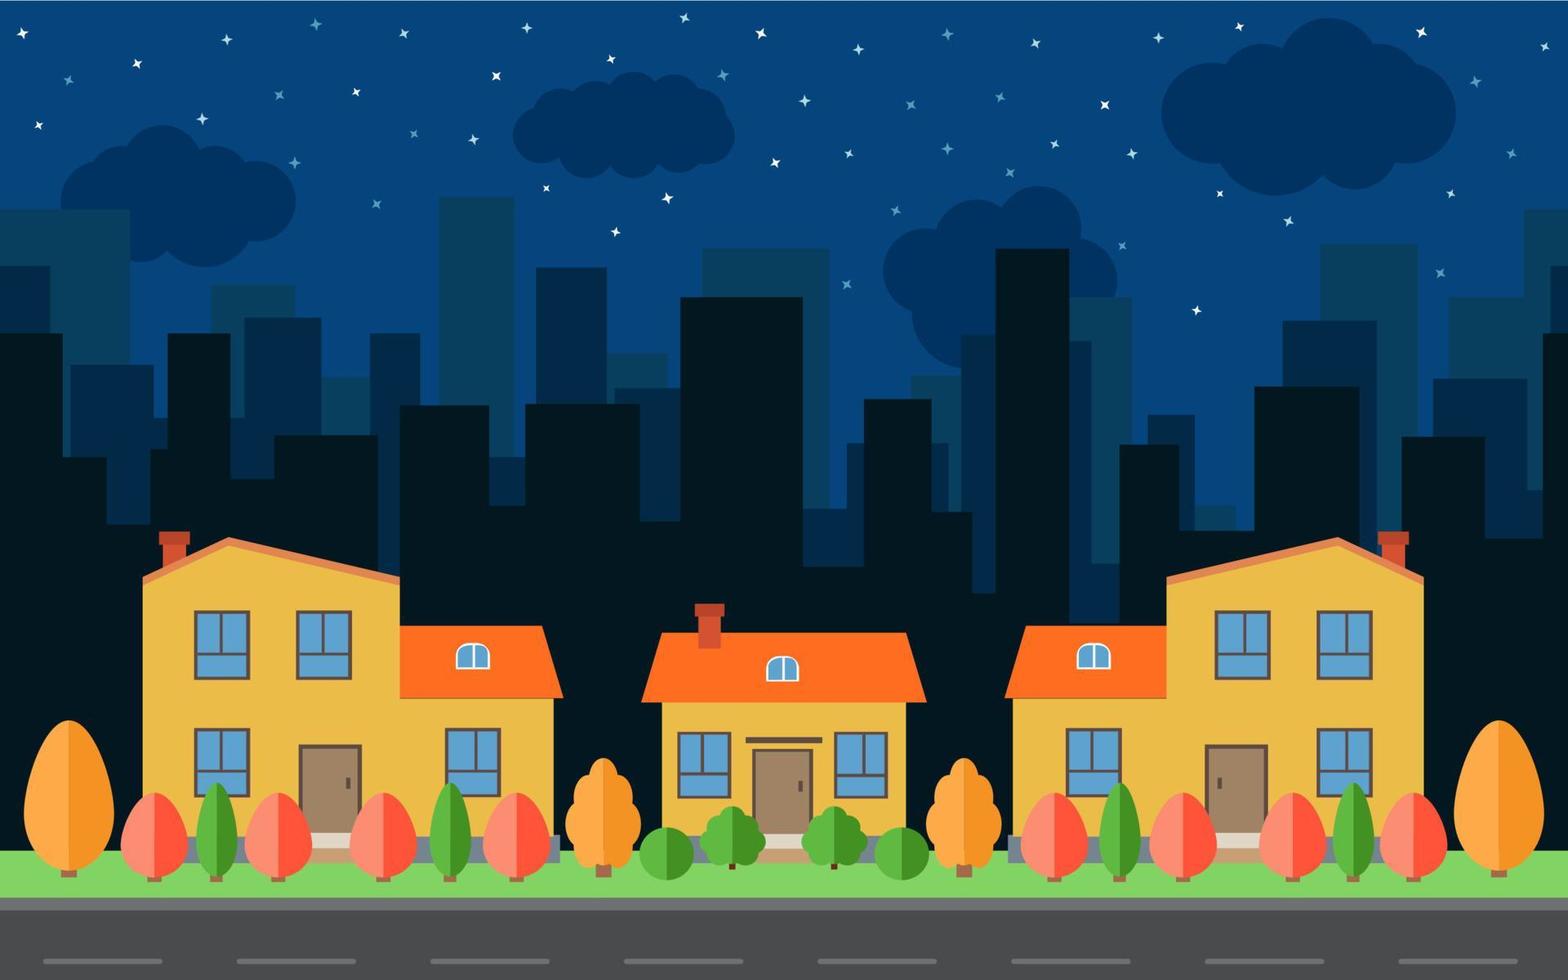 Vector night city with cartoon houses and buildings with red, yellow and green trees and shrubs. City space with road on flat style background concept. Summer urban landscape